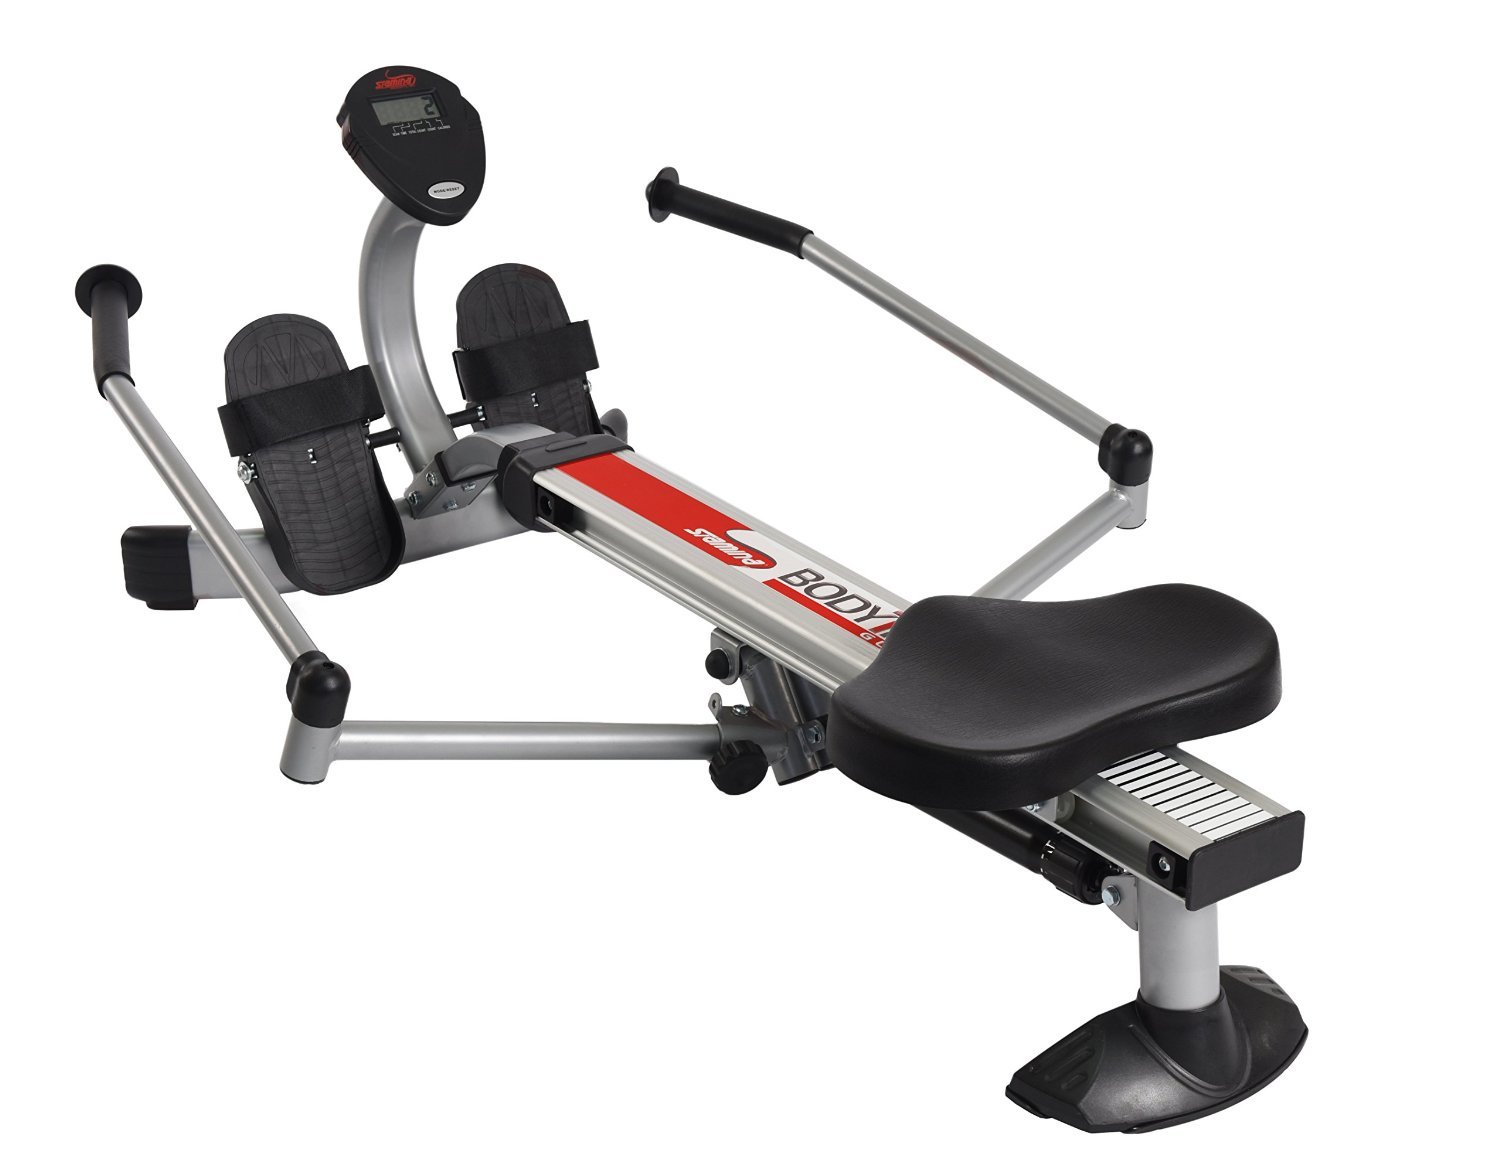 the Stamina Body Trac Glider 1050 Rowing Machine pictured here is the best indoor rower 200 dollars